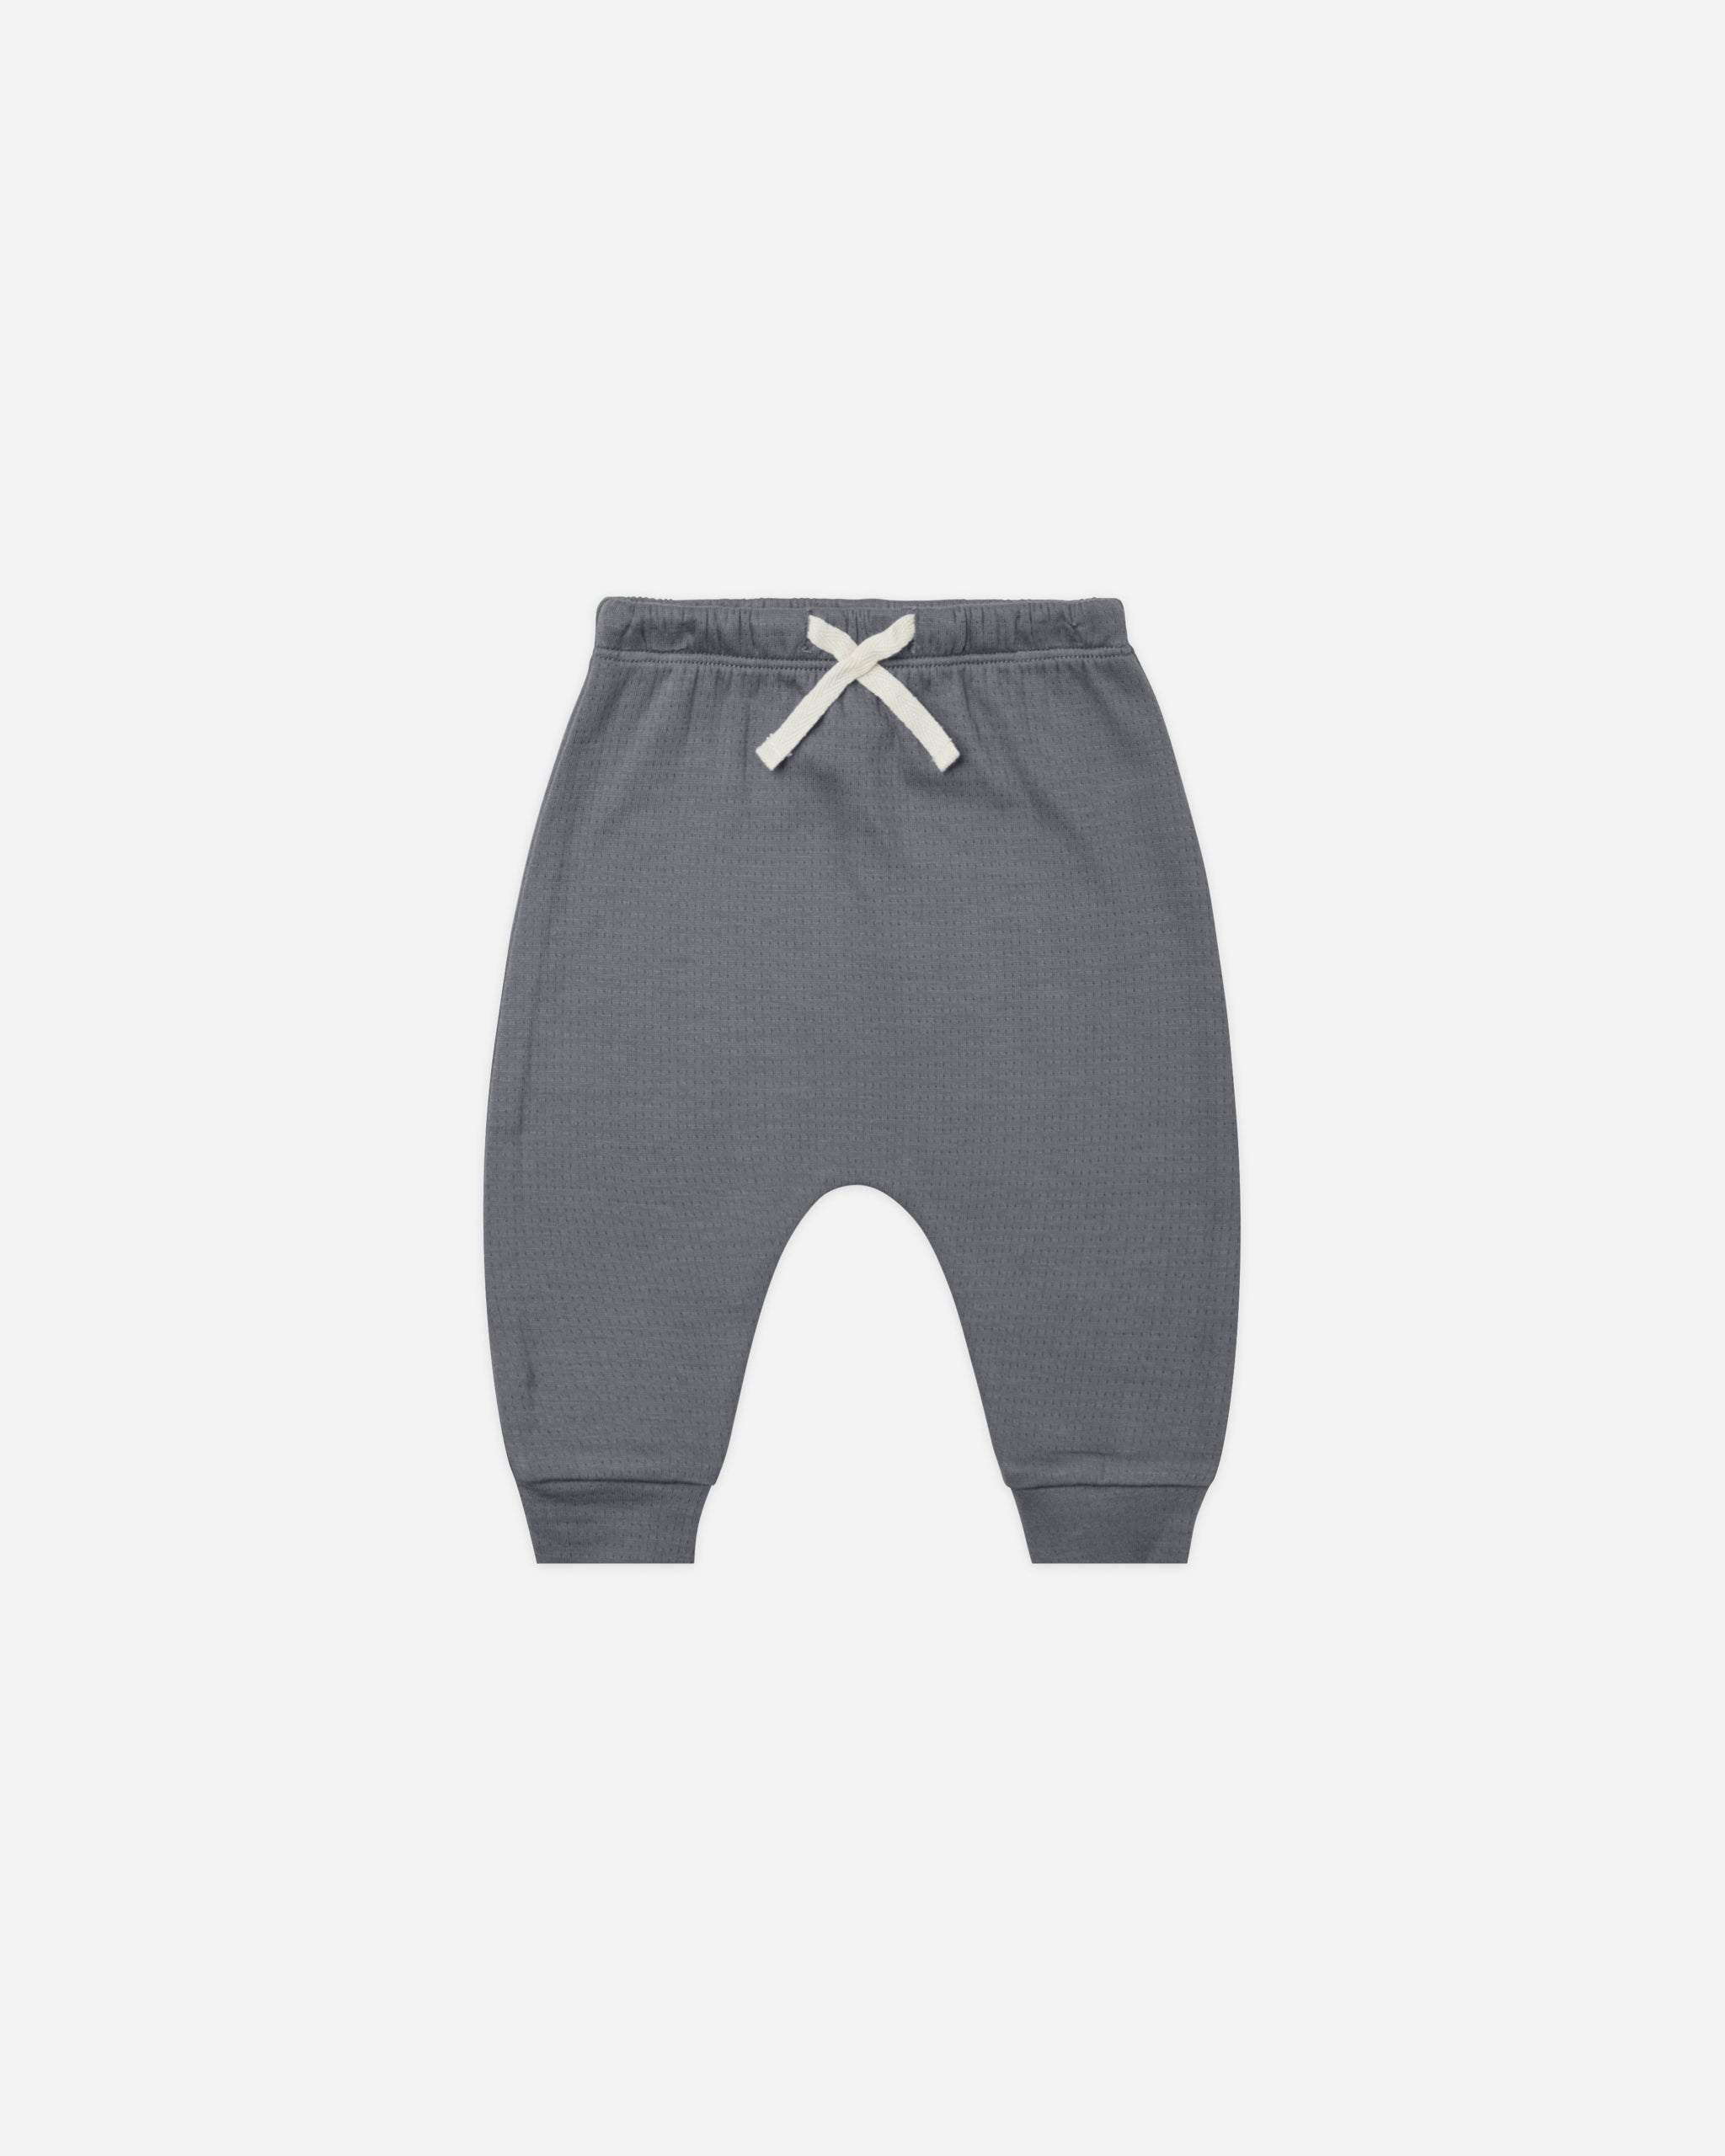 Pointelle Sweatpant || Navy - Rylee + Cru | Kids Clothes | Trendy Baby Clothes | Modern Infant Outfits |